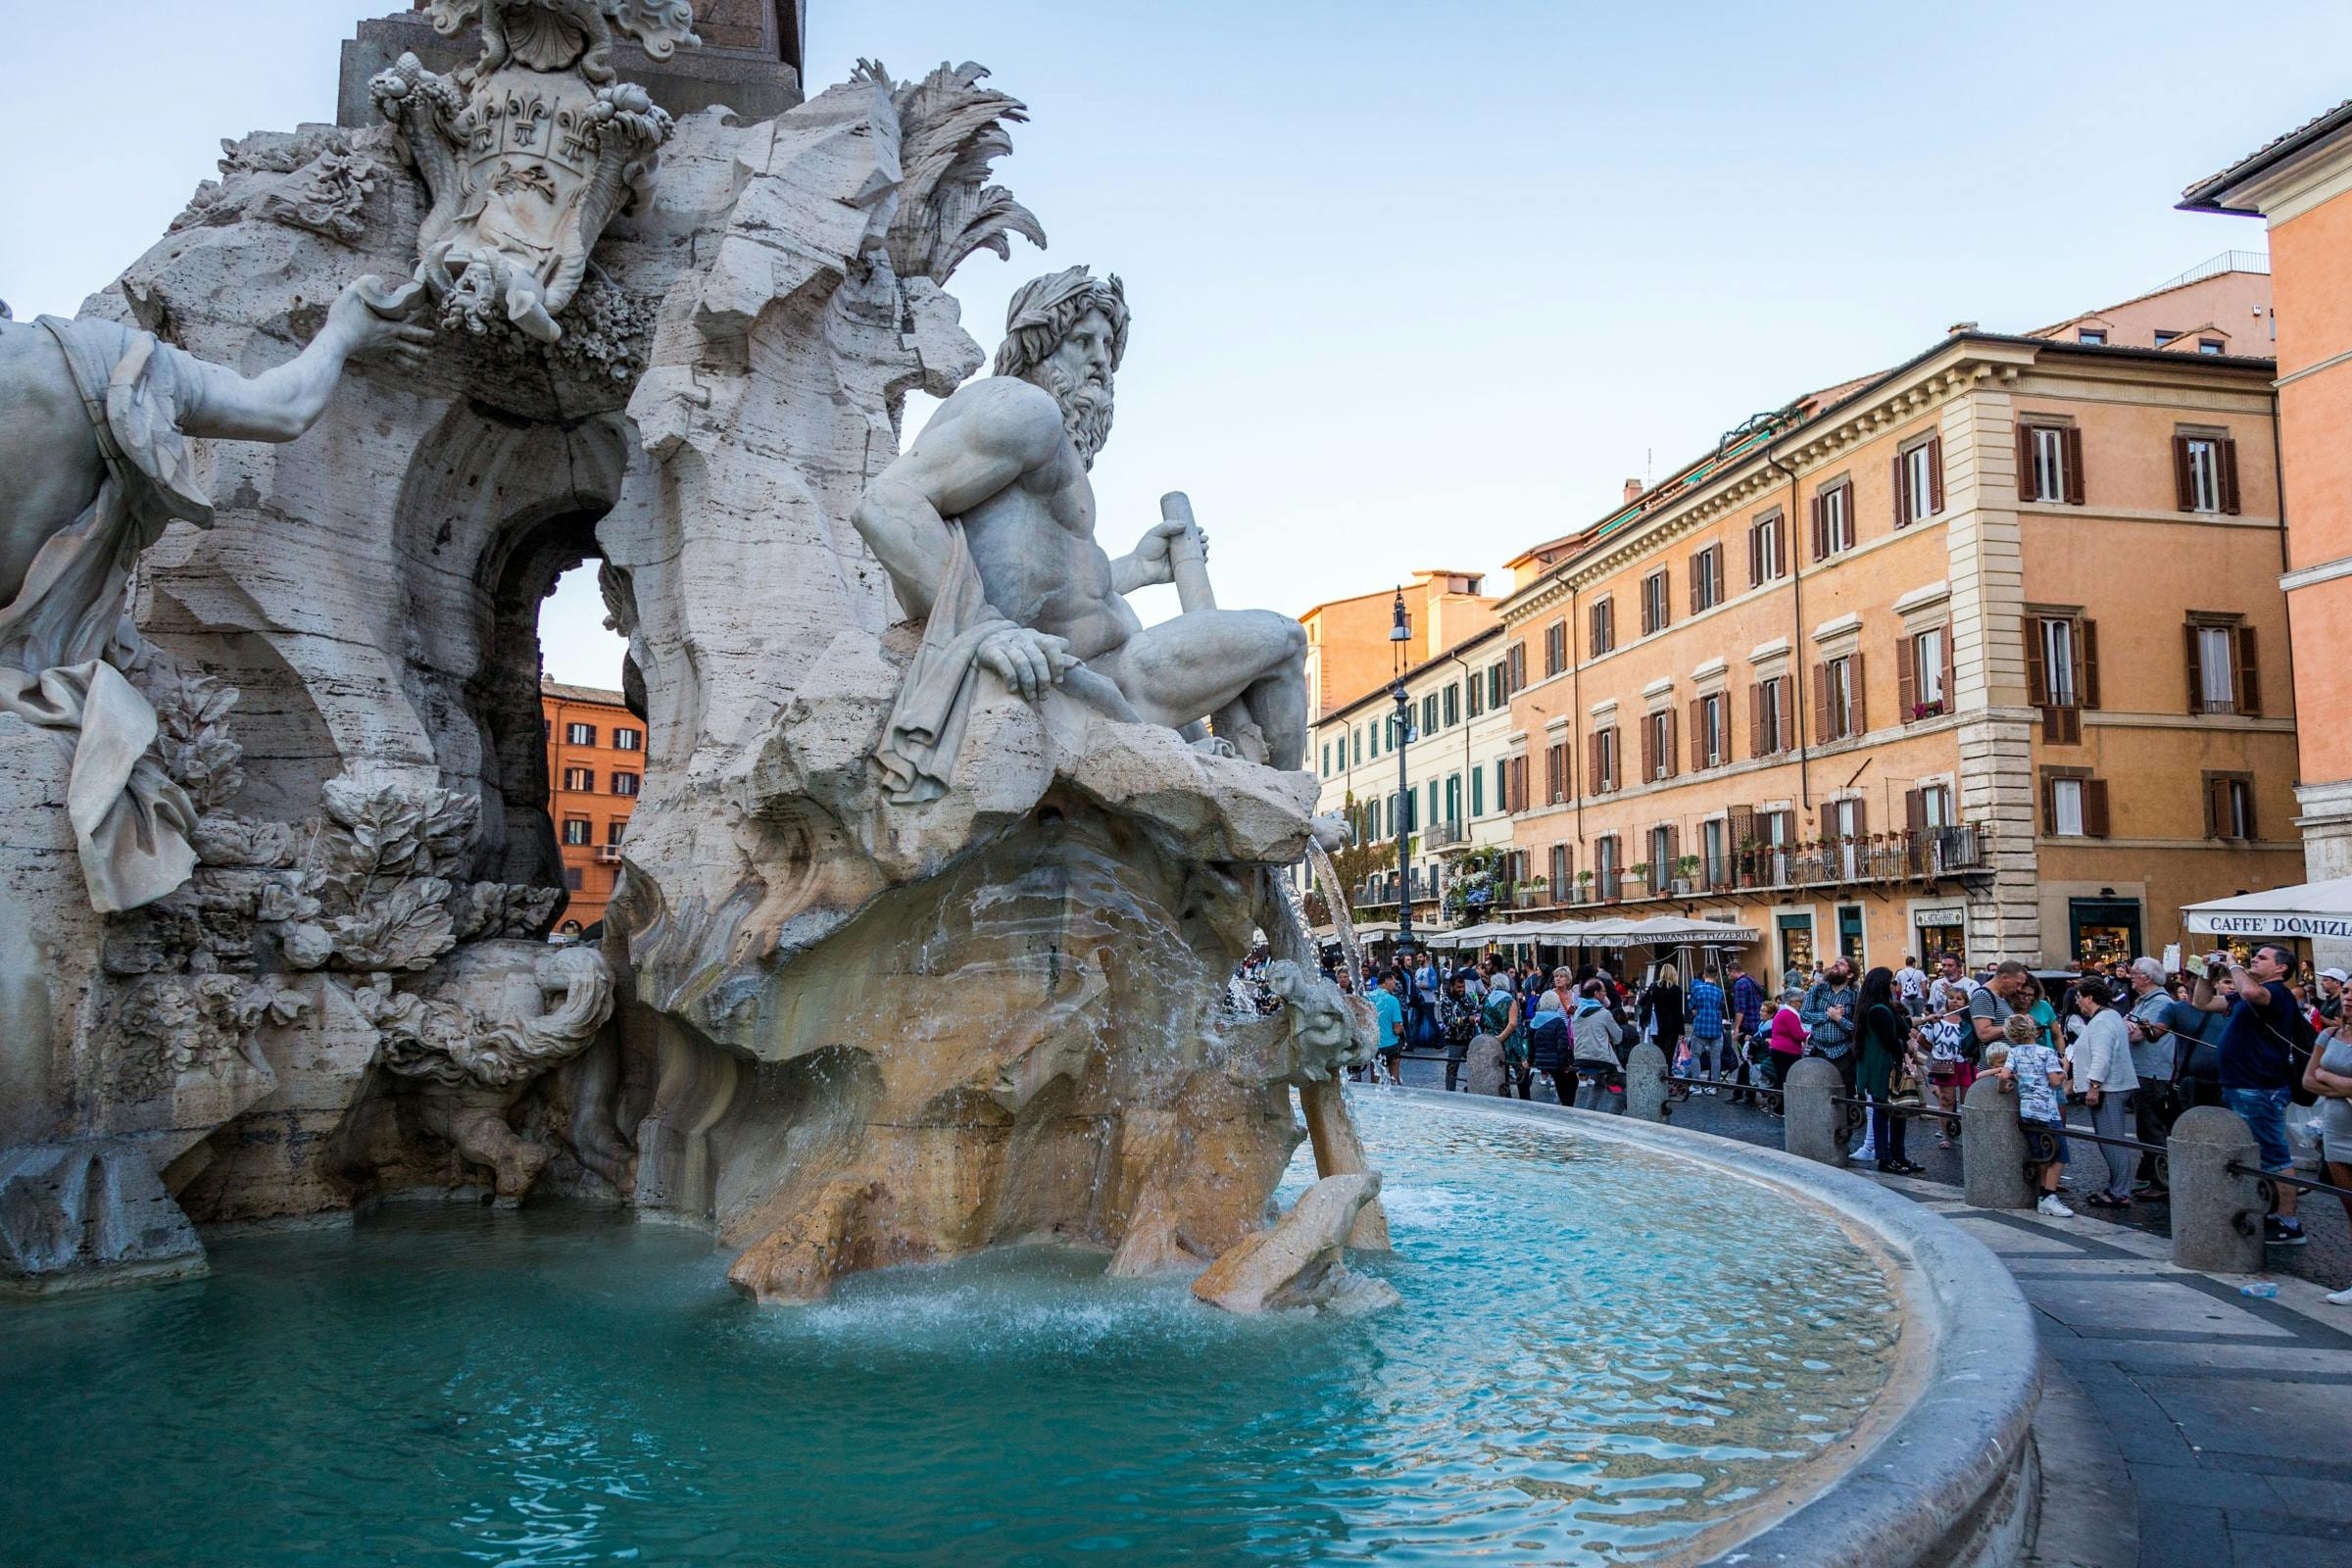 Best of Rome walking tour with the Spanish Steps, Trevi Fountain and Pantheon